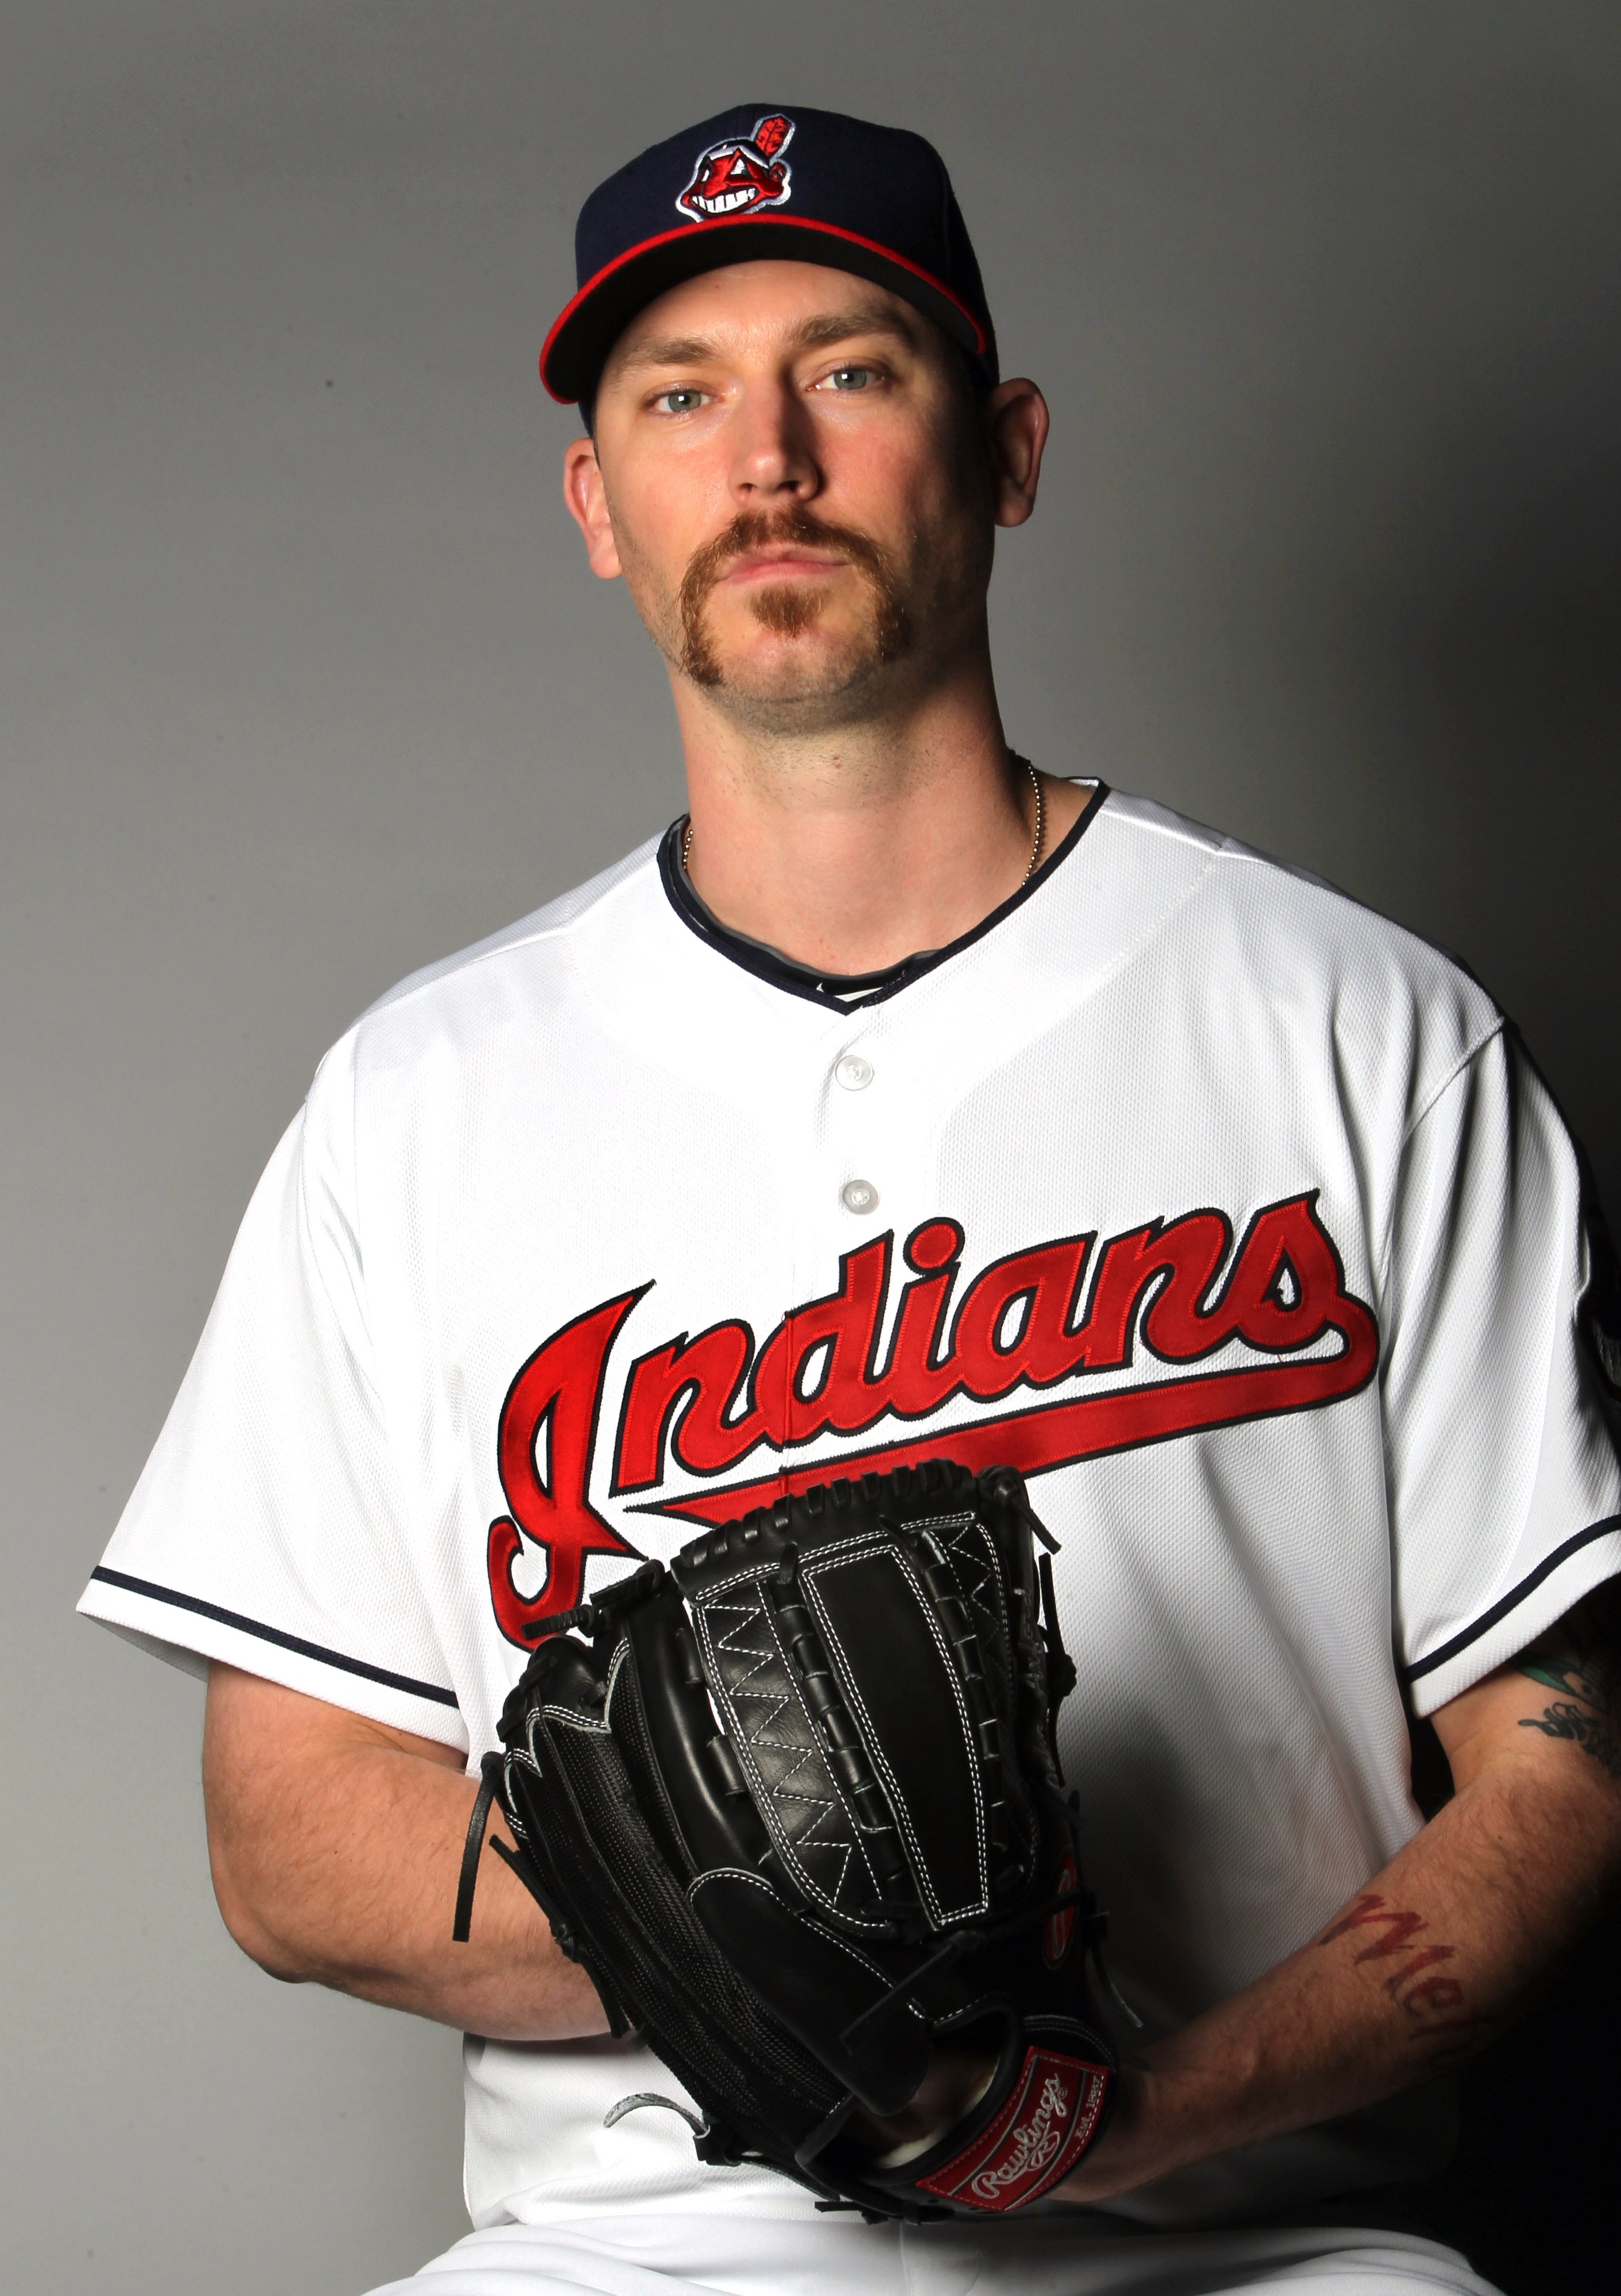 When Indians closer John Axford learned he'd get just a one year contract after pitching in 74, 75, and 75 games in consecutive seasons, he might not have been pleased.